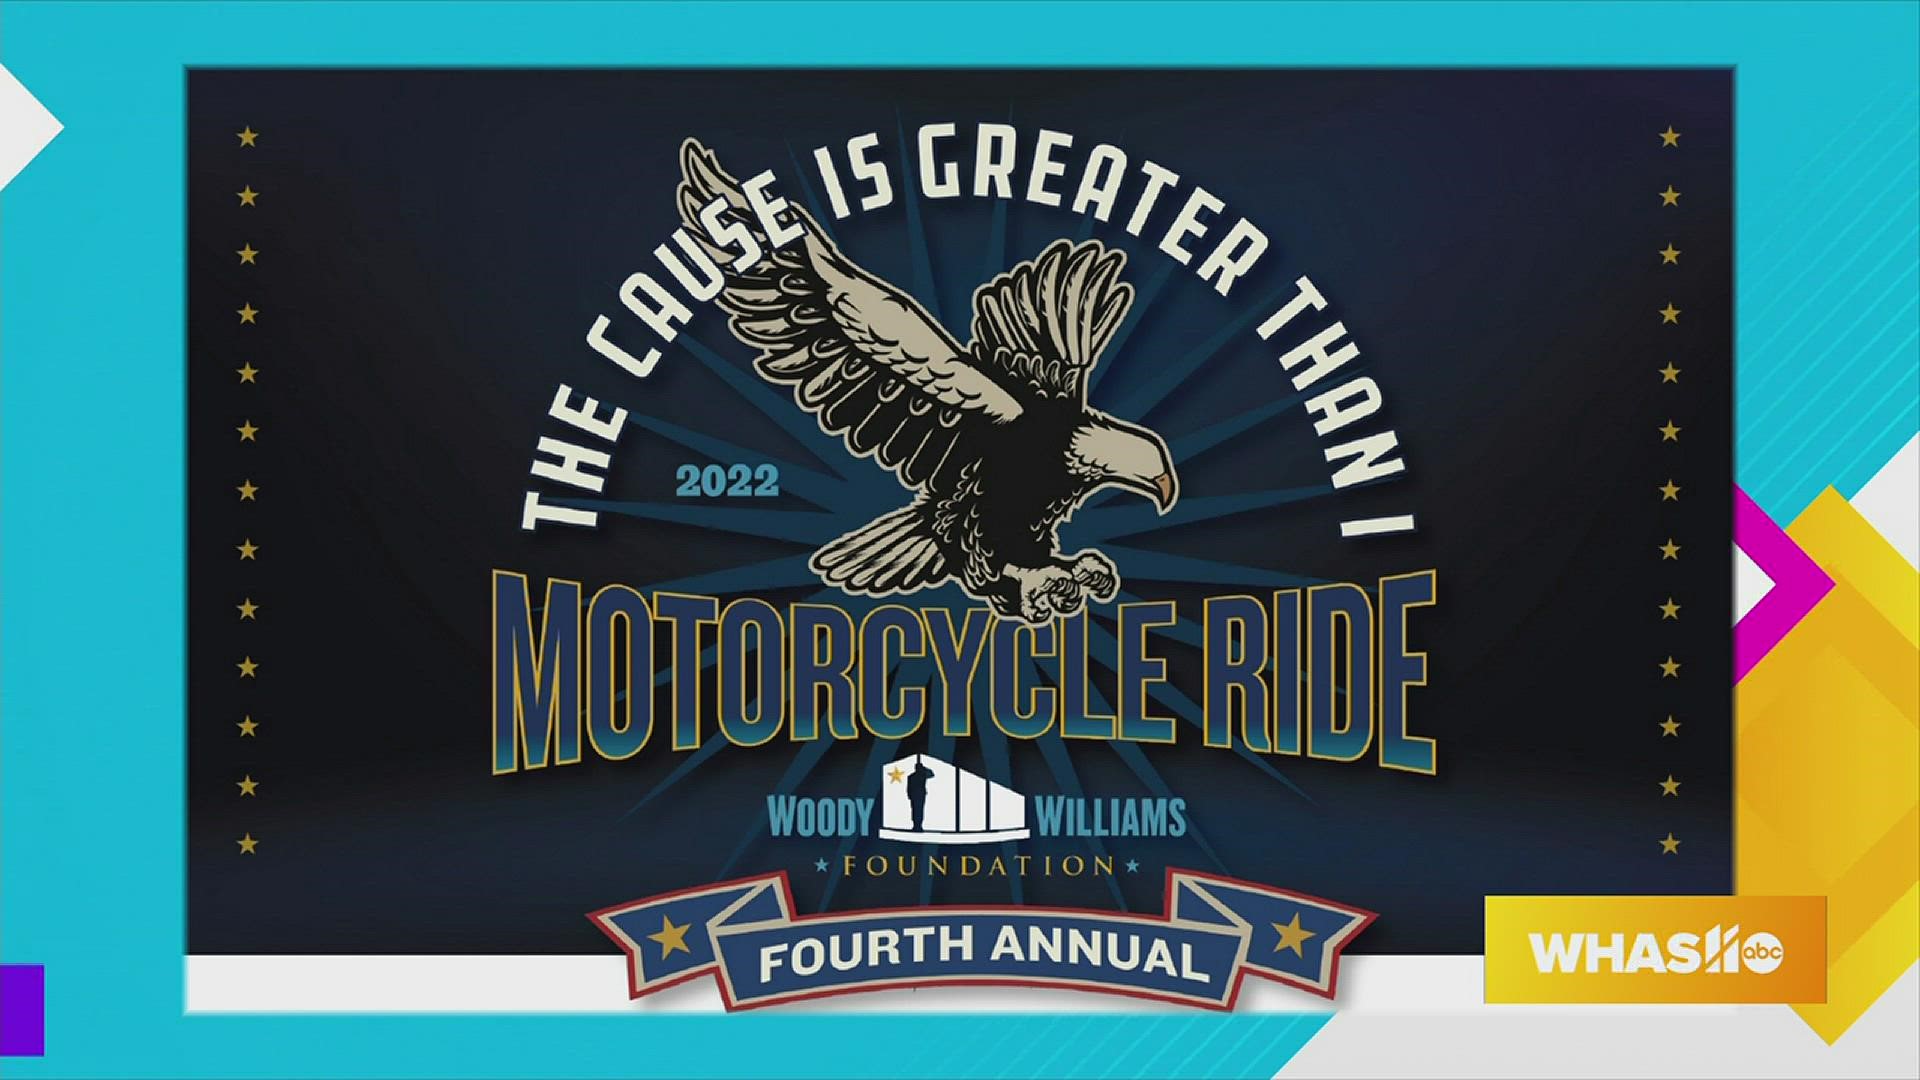 To learn more about Woody Williams Foundation 4th annual motorcycle ride, visit woodywilliams.org.